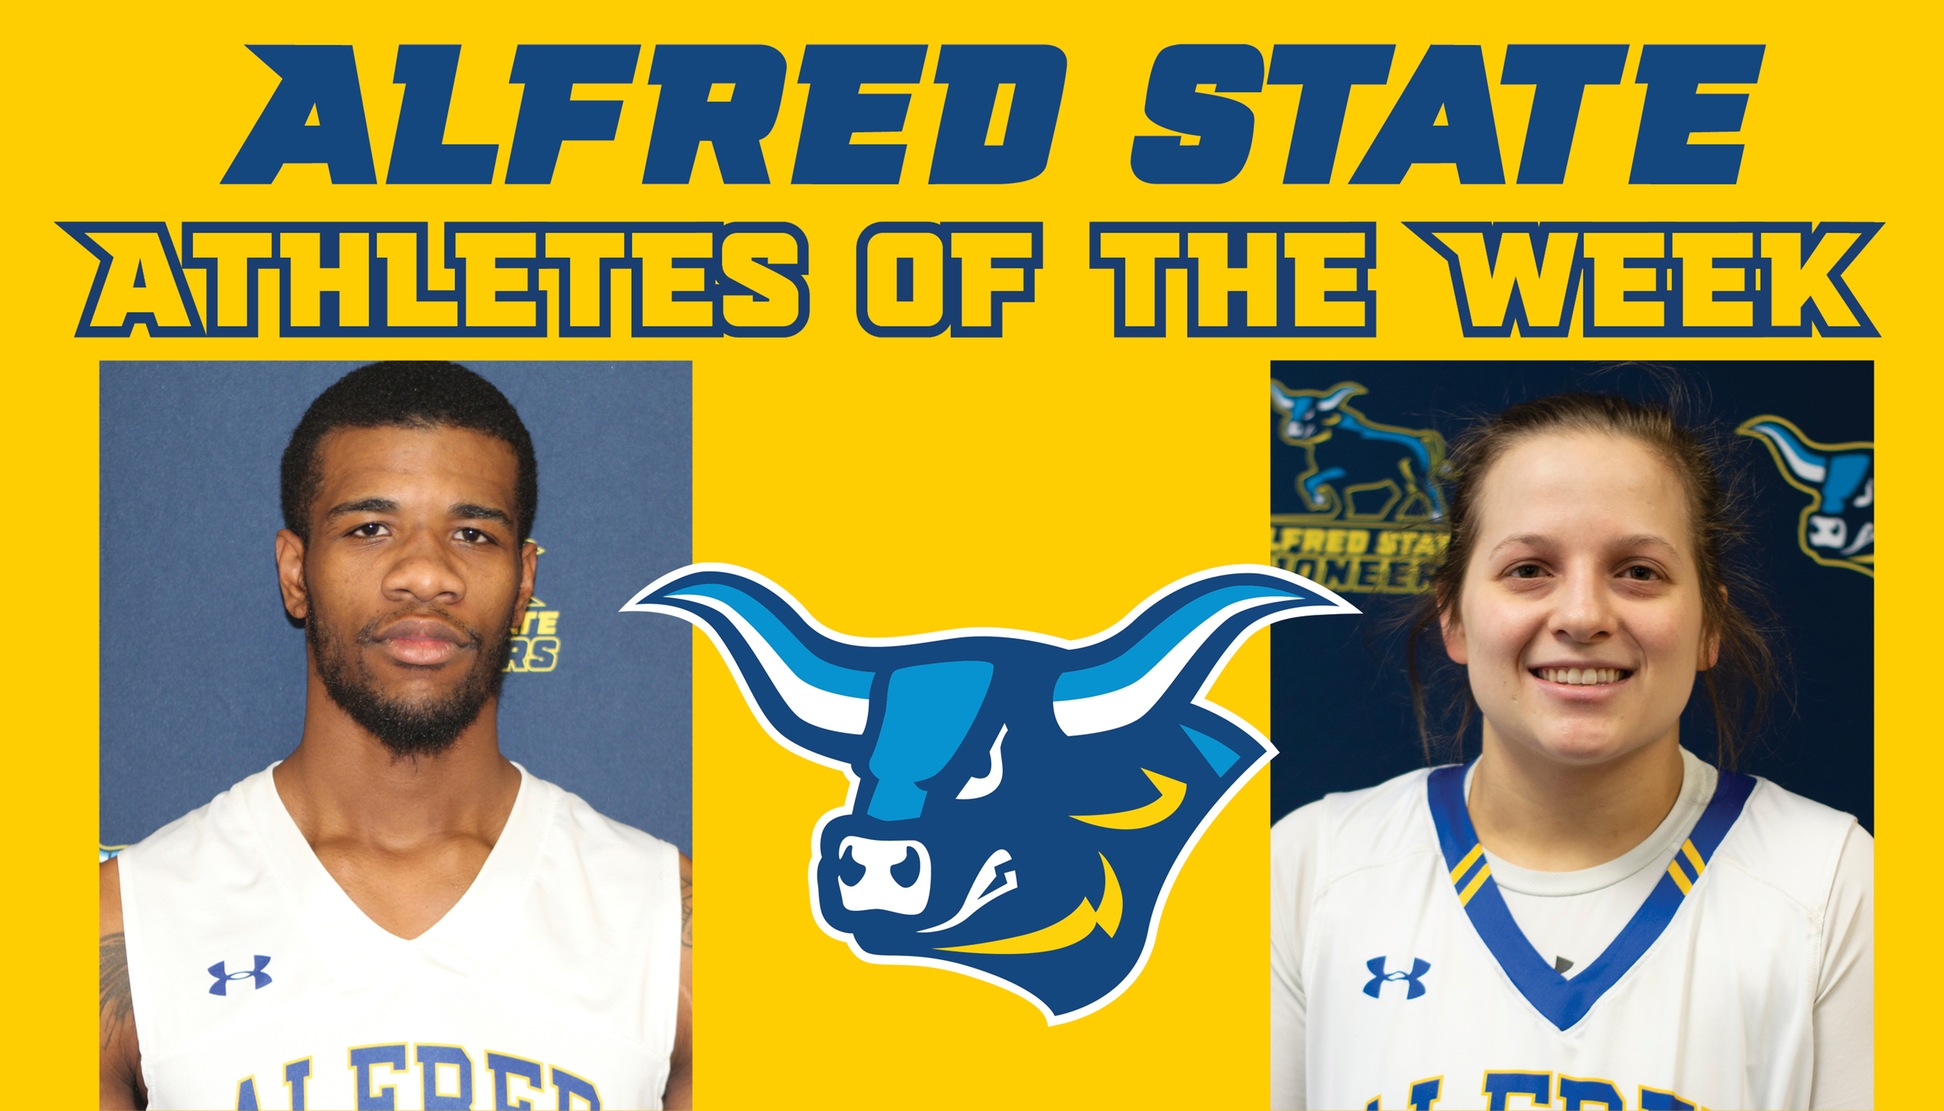 Ray Anderson and Taj Lewis named athletes of the week.